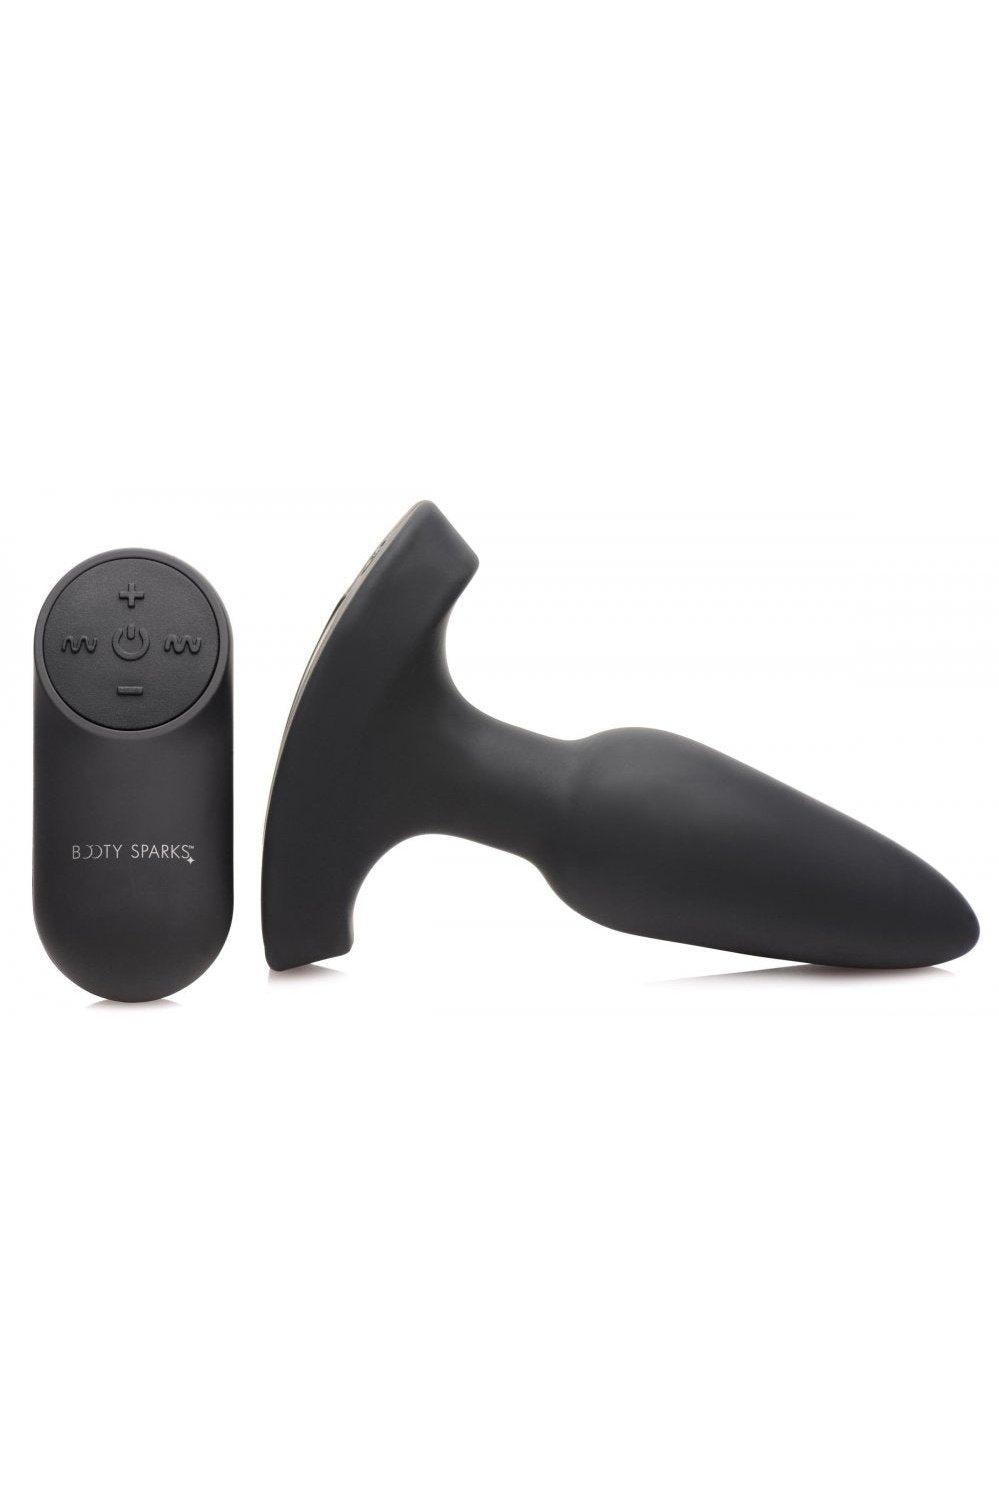 28X Laser Fuck Me Silicone Anal Plug with Remote Control - Small - Sex On the Go